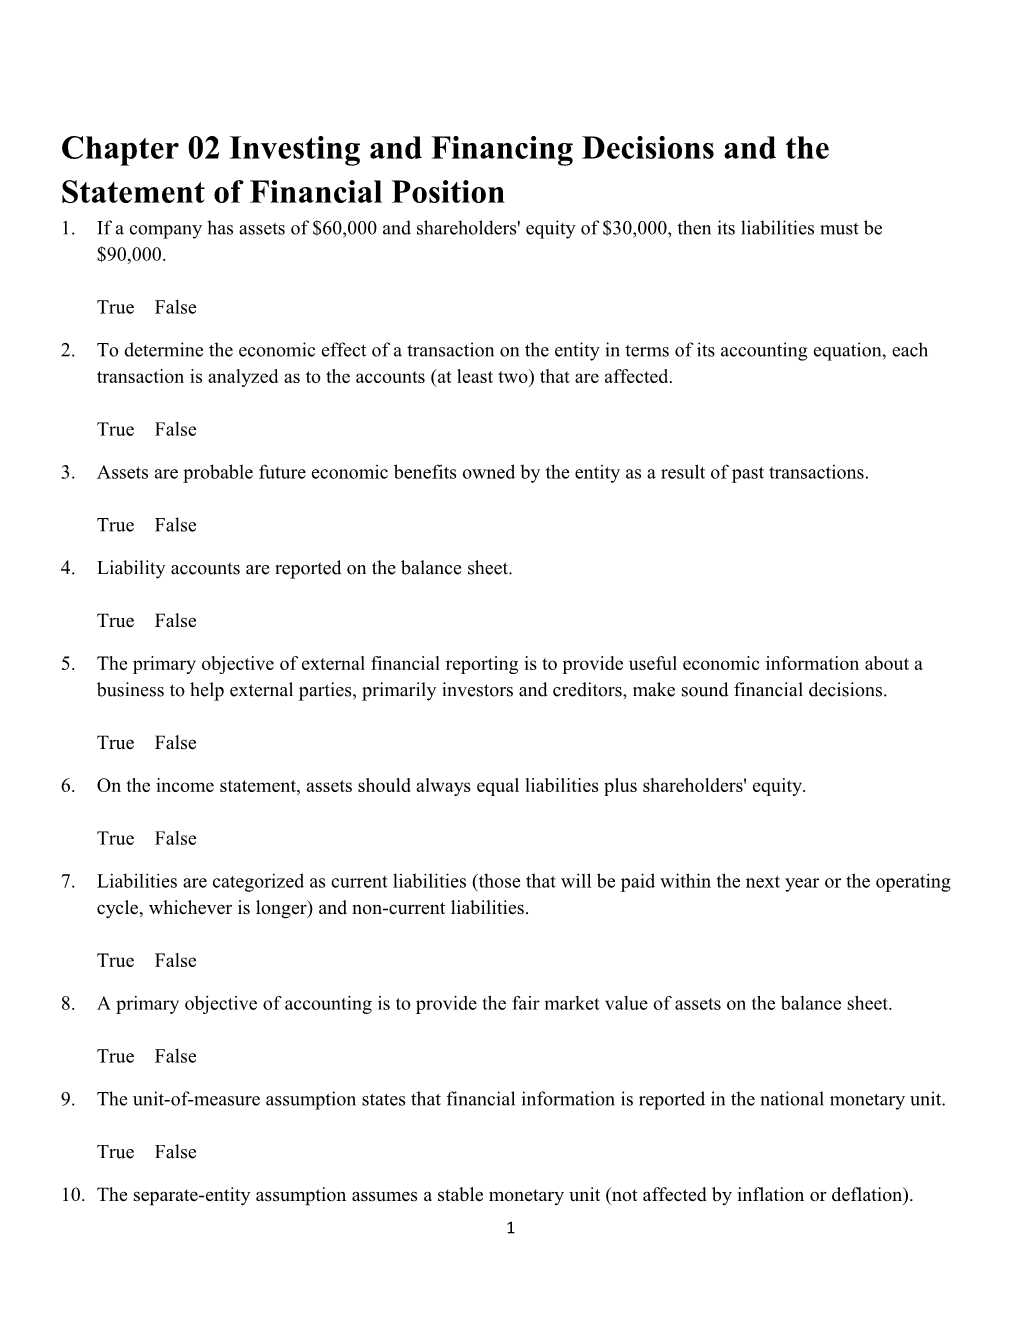 Chapter 02 Investing and Financing Decisions and the Statement of Financial Position